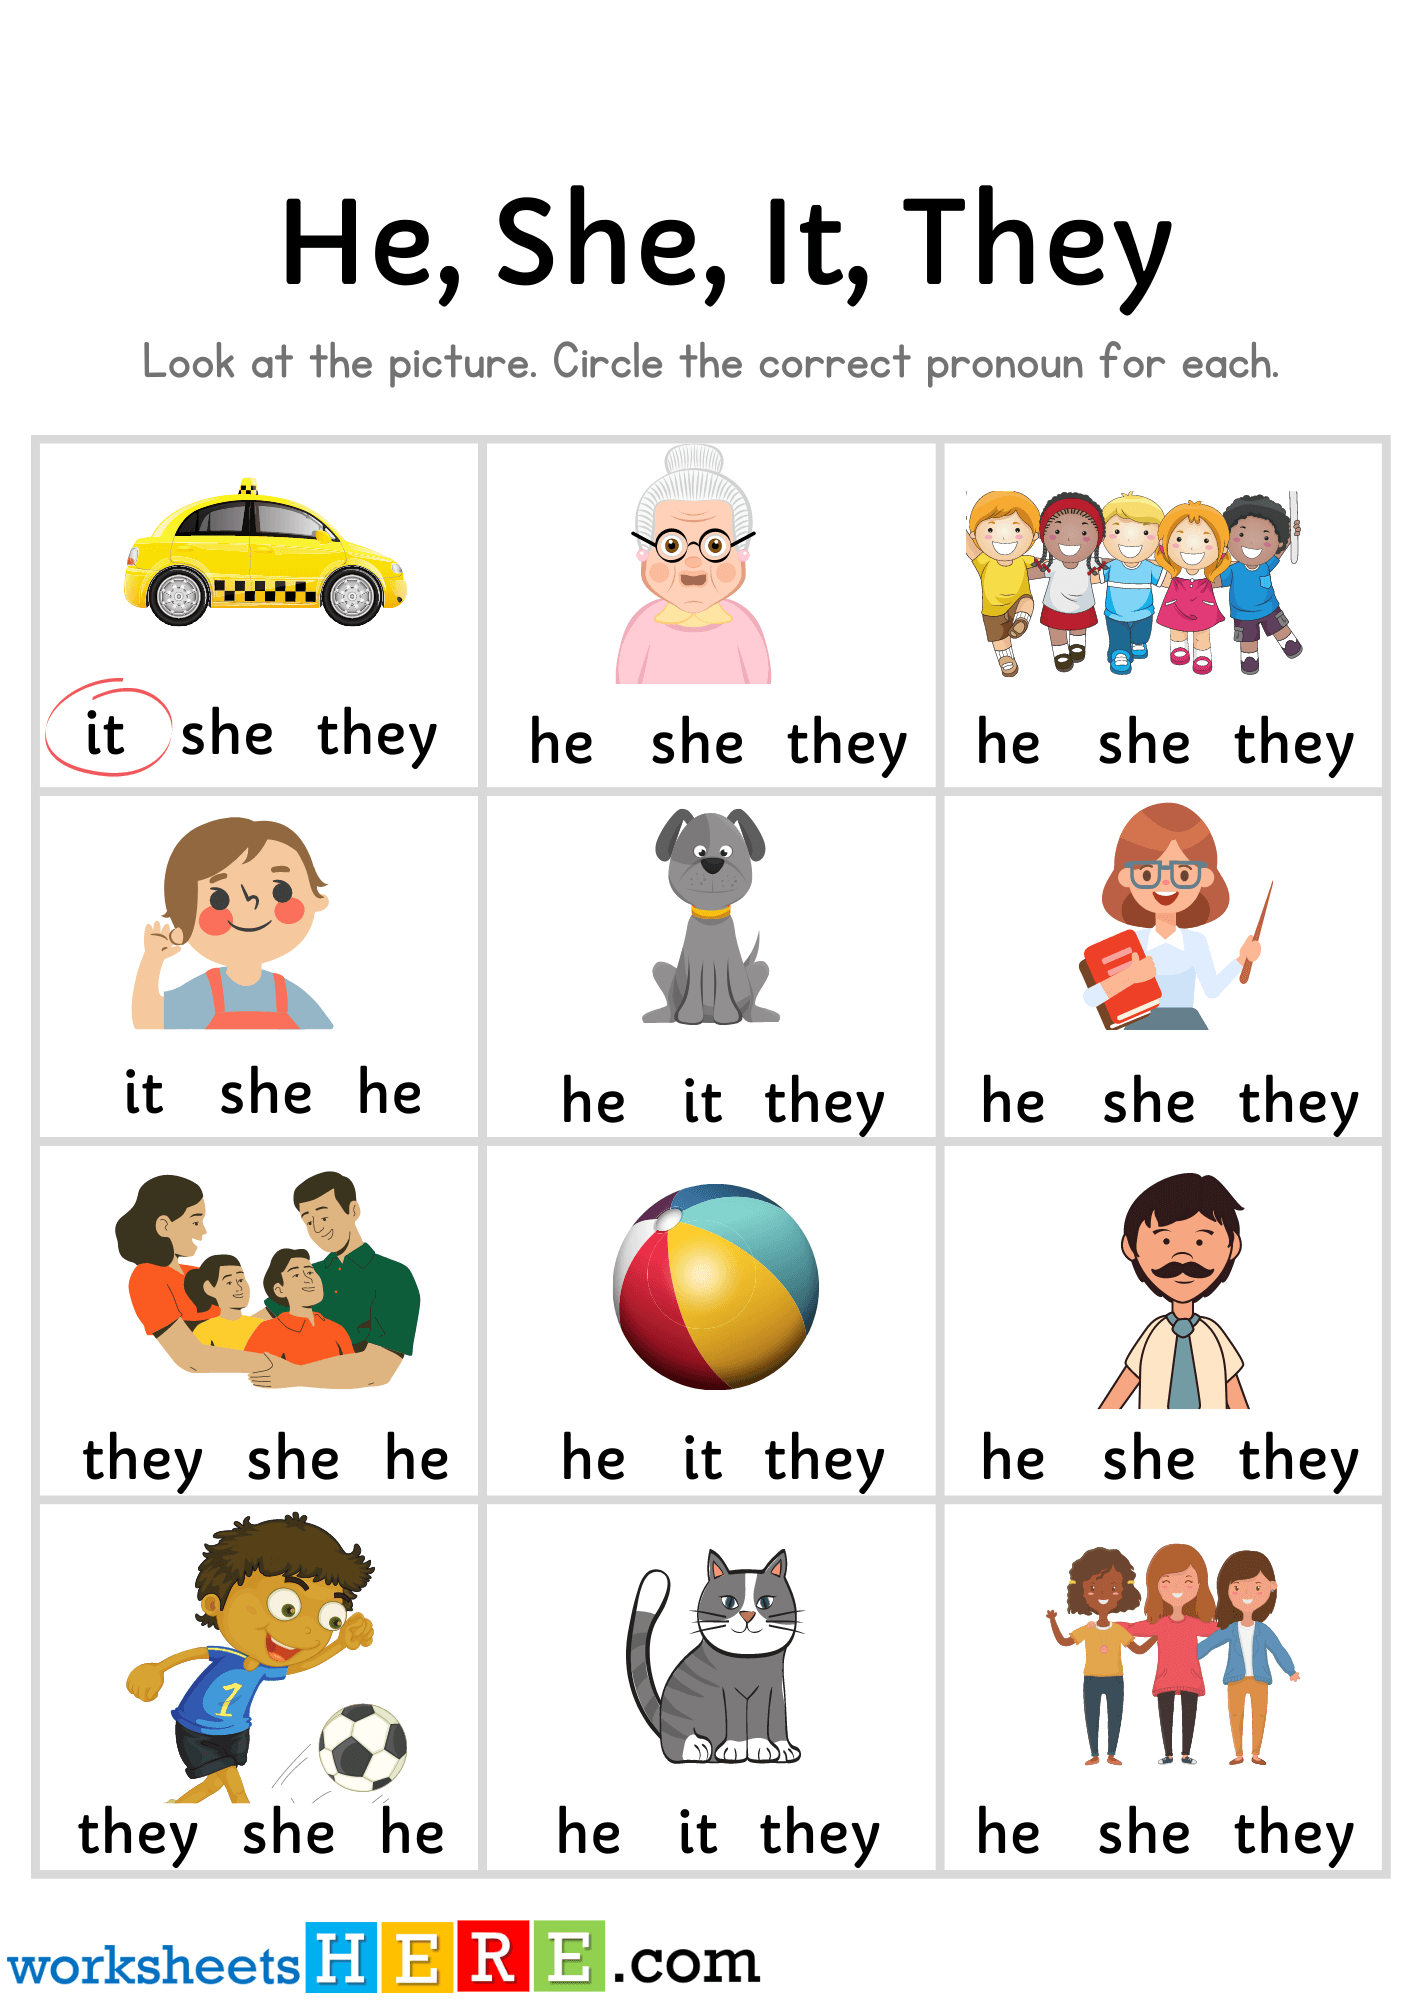 He She They It Pronouns Exercises with Pictures, Personal Pronouns PDF Worksheet